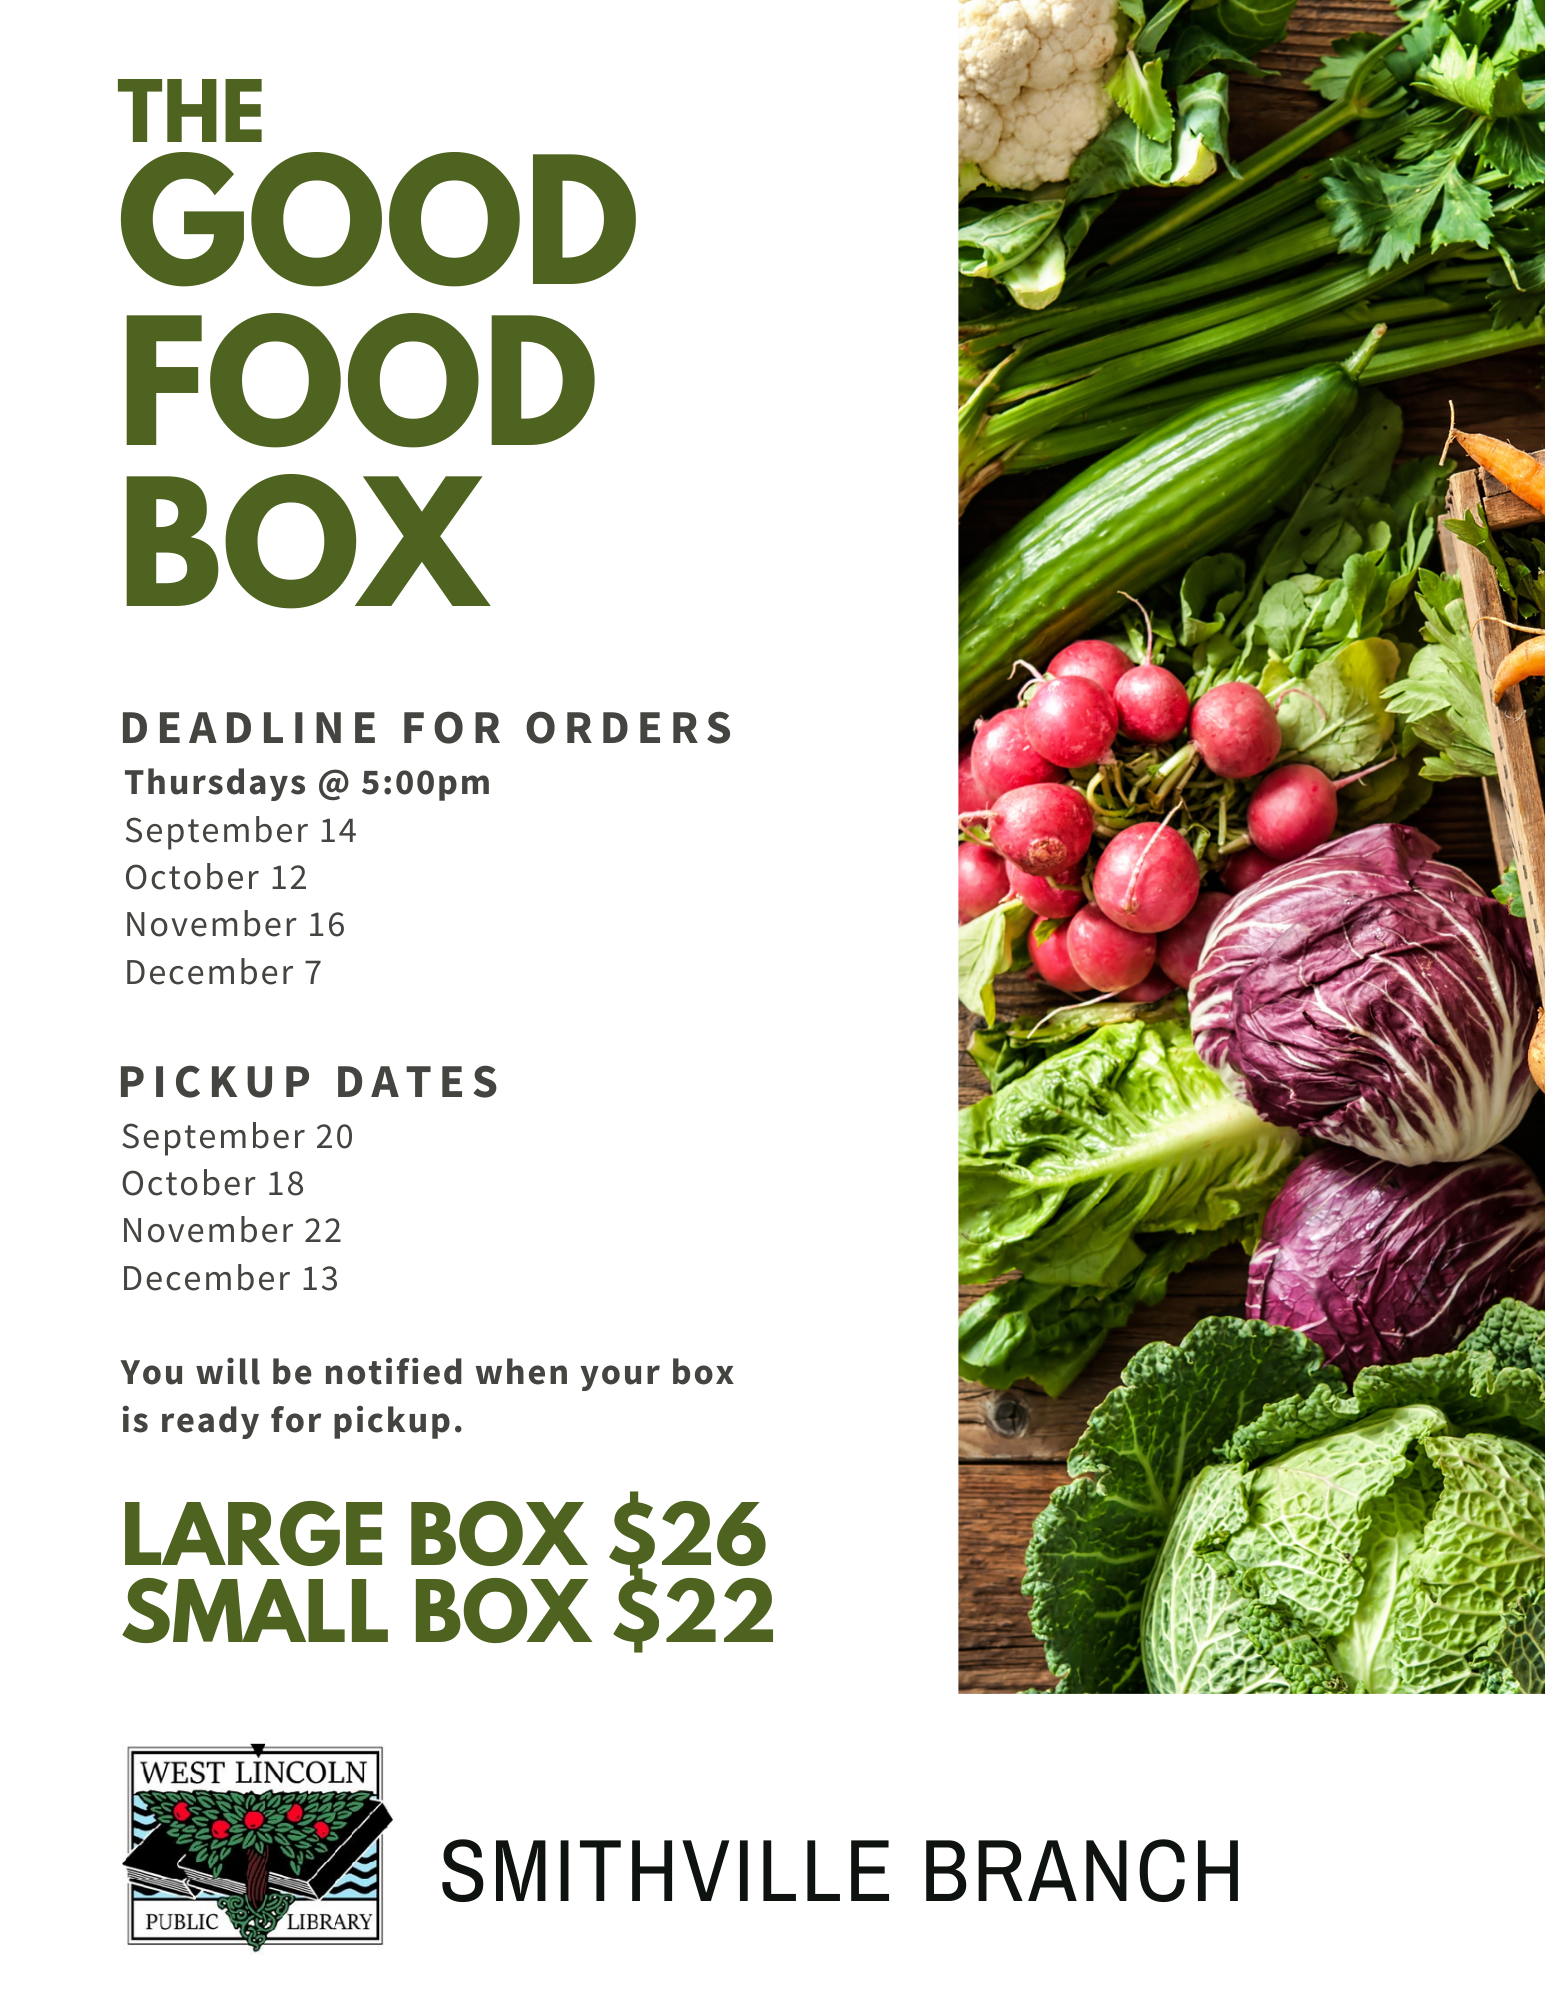 poster for Good Food Box program. deadline for orders: Thursdays @ 5:00pm, September 14, October 12, November 16, December 7, pickup dates: September 20, October 18, November 22, December 13. You will be notified when your box is ready for pickup. Large box $26; Small box $22. Smithville Branch